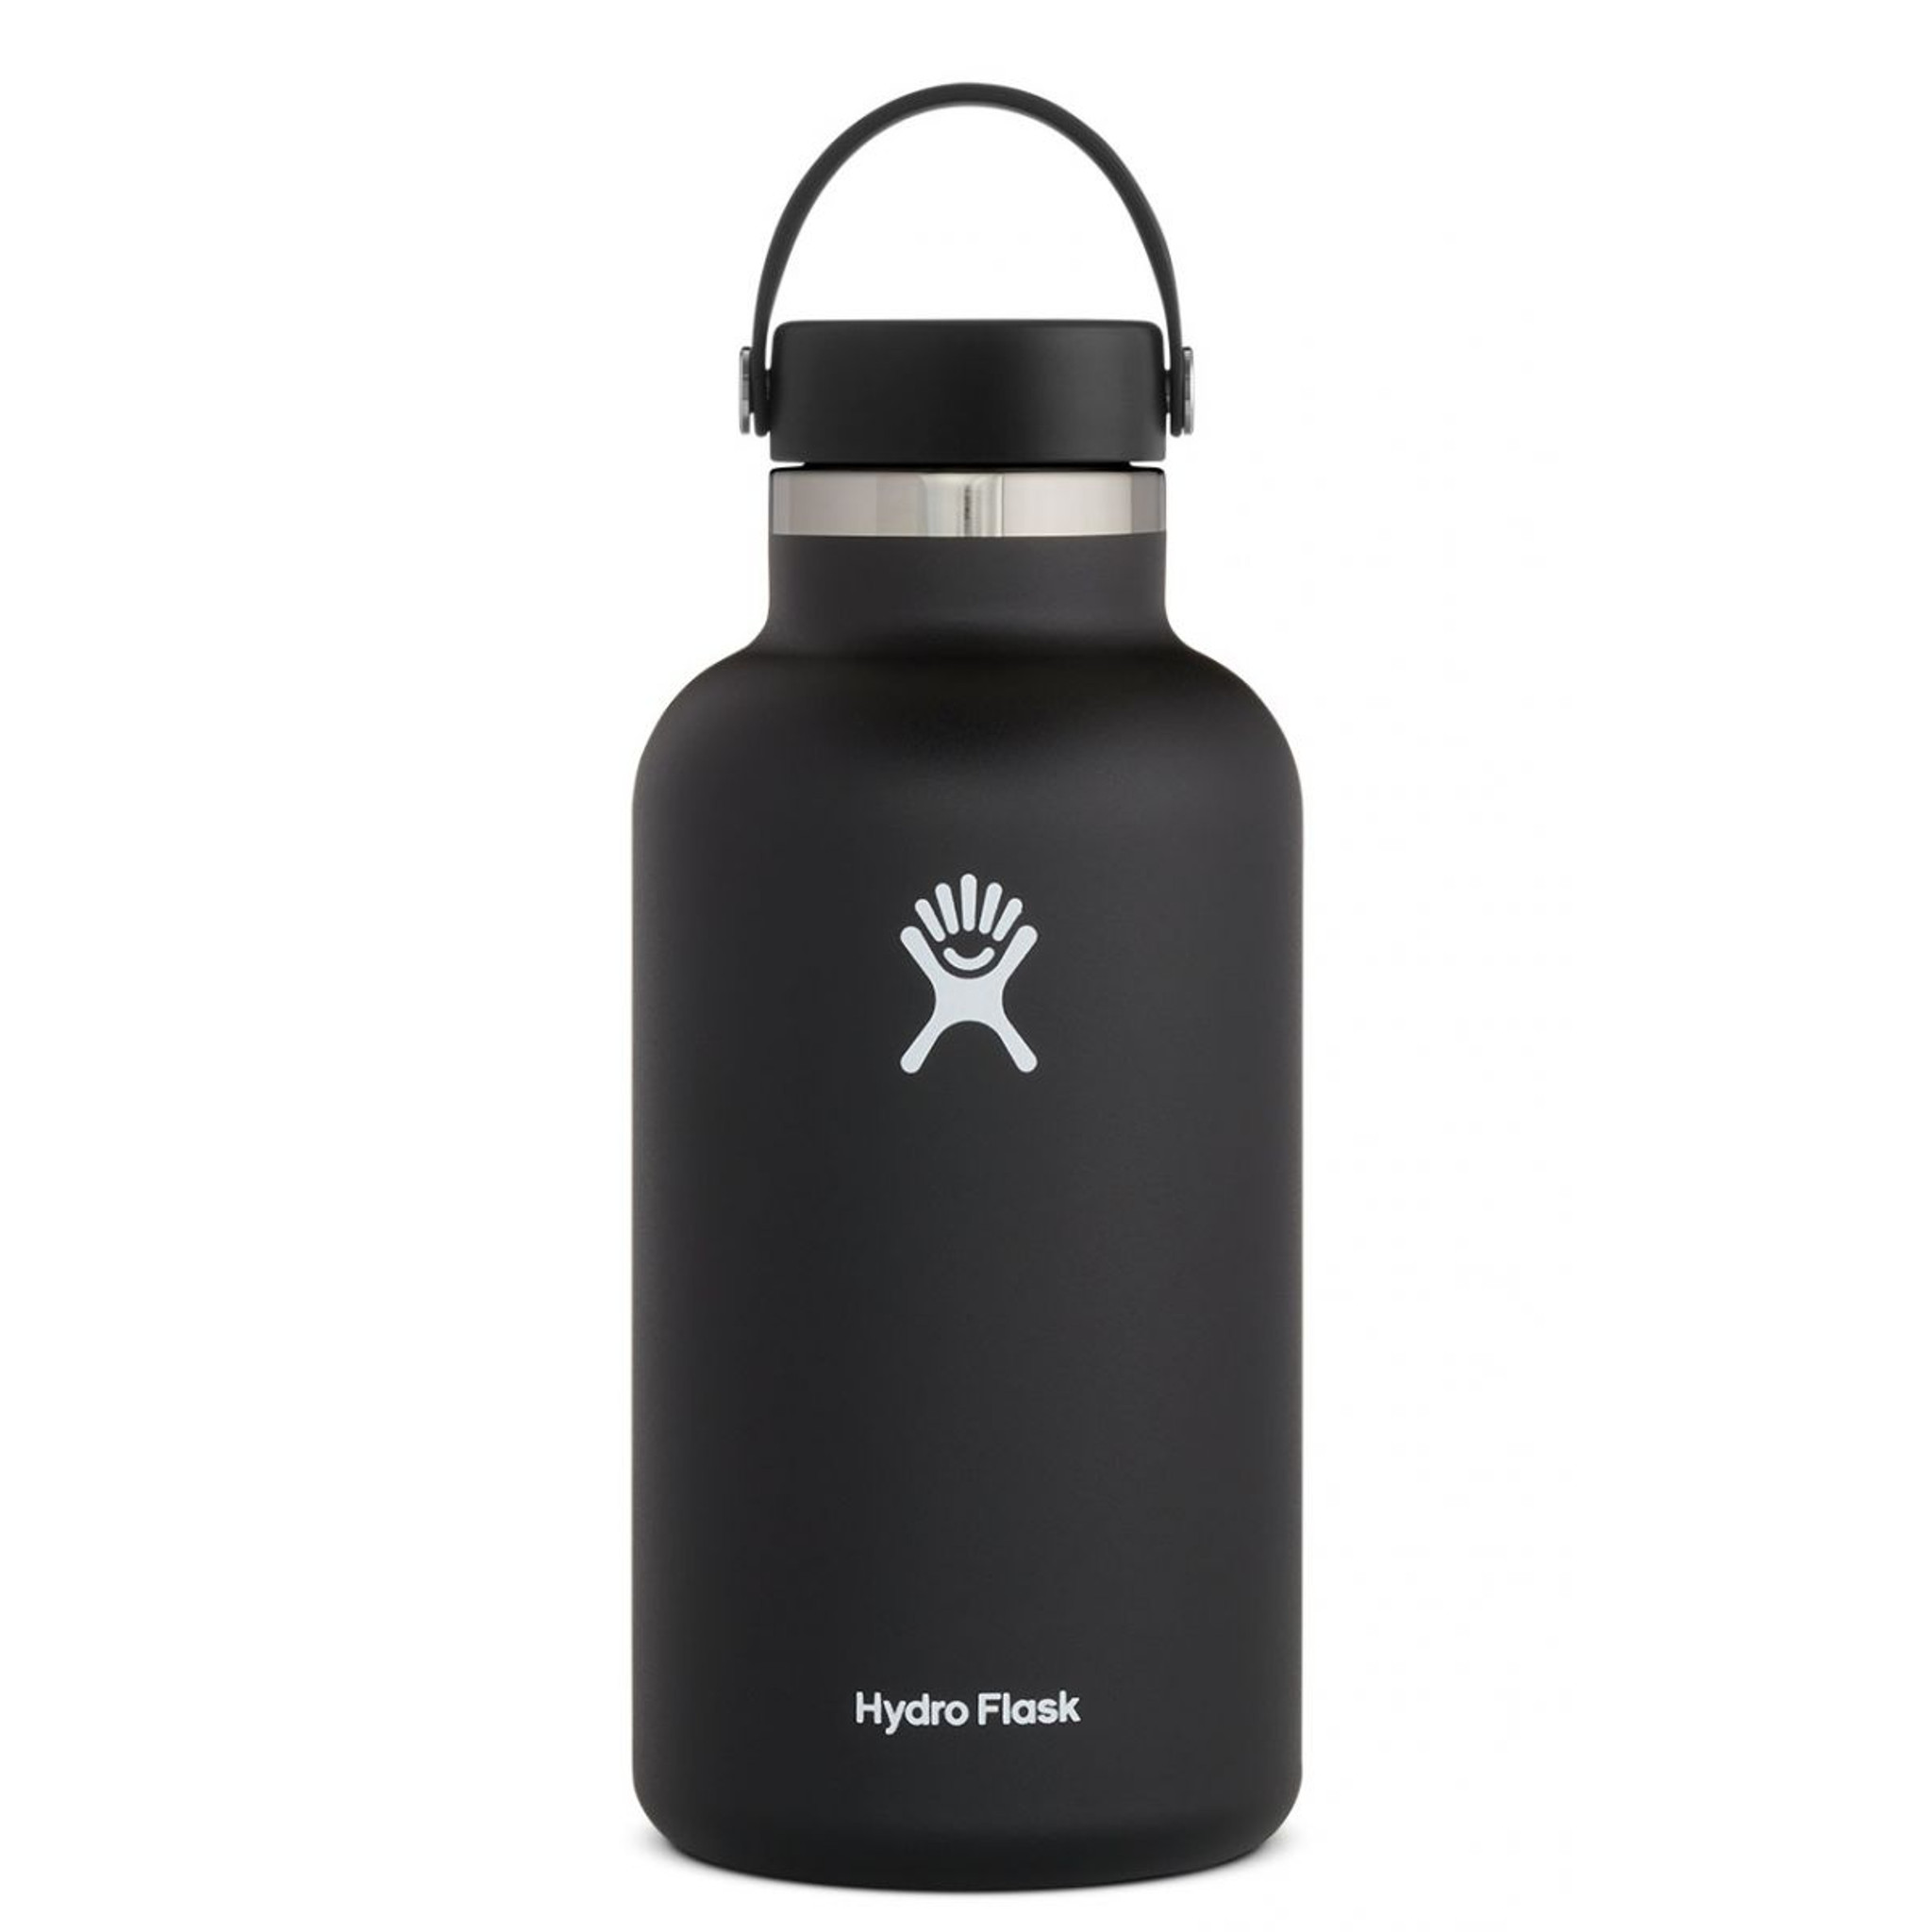 Hydroflask Insulated Tote bags  Check out our new Hydroflask